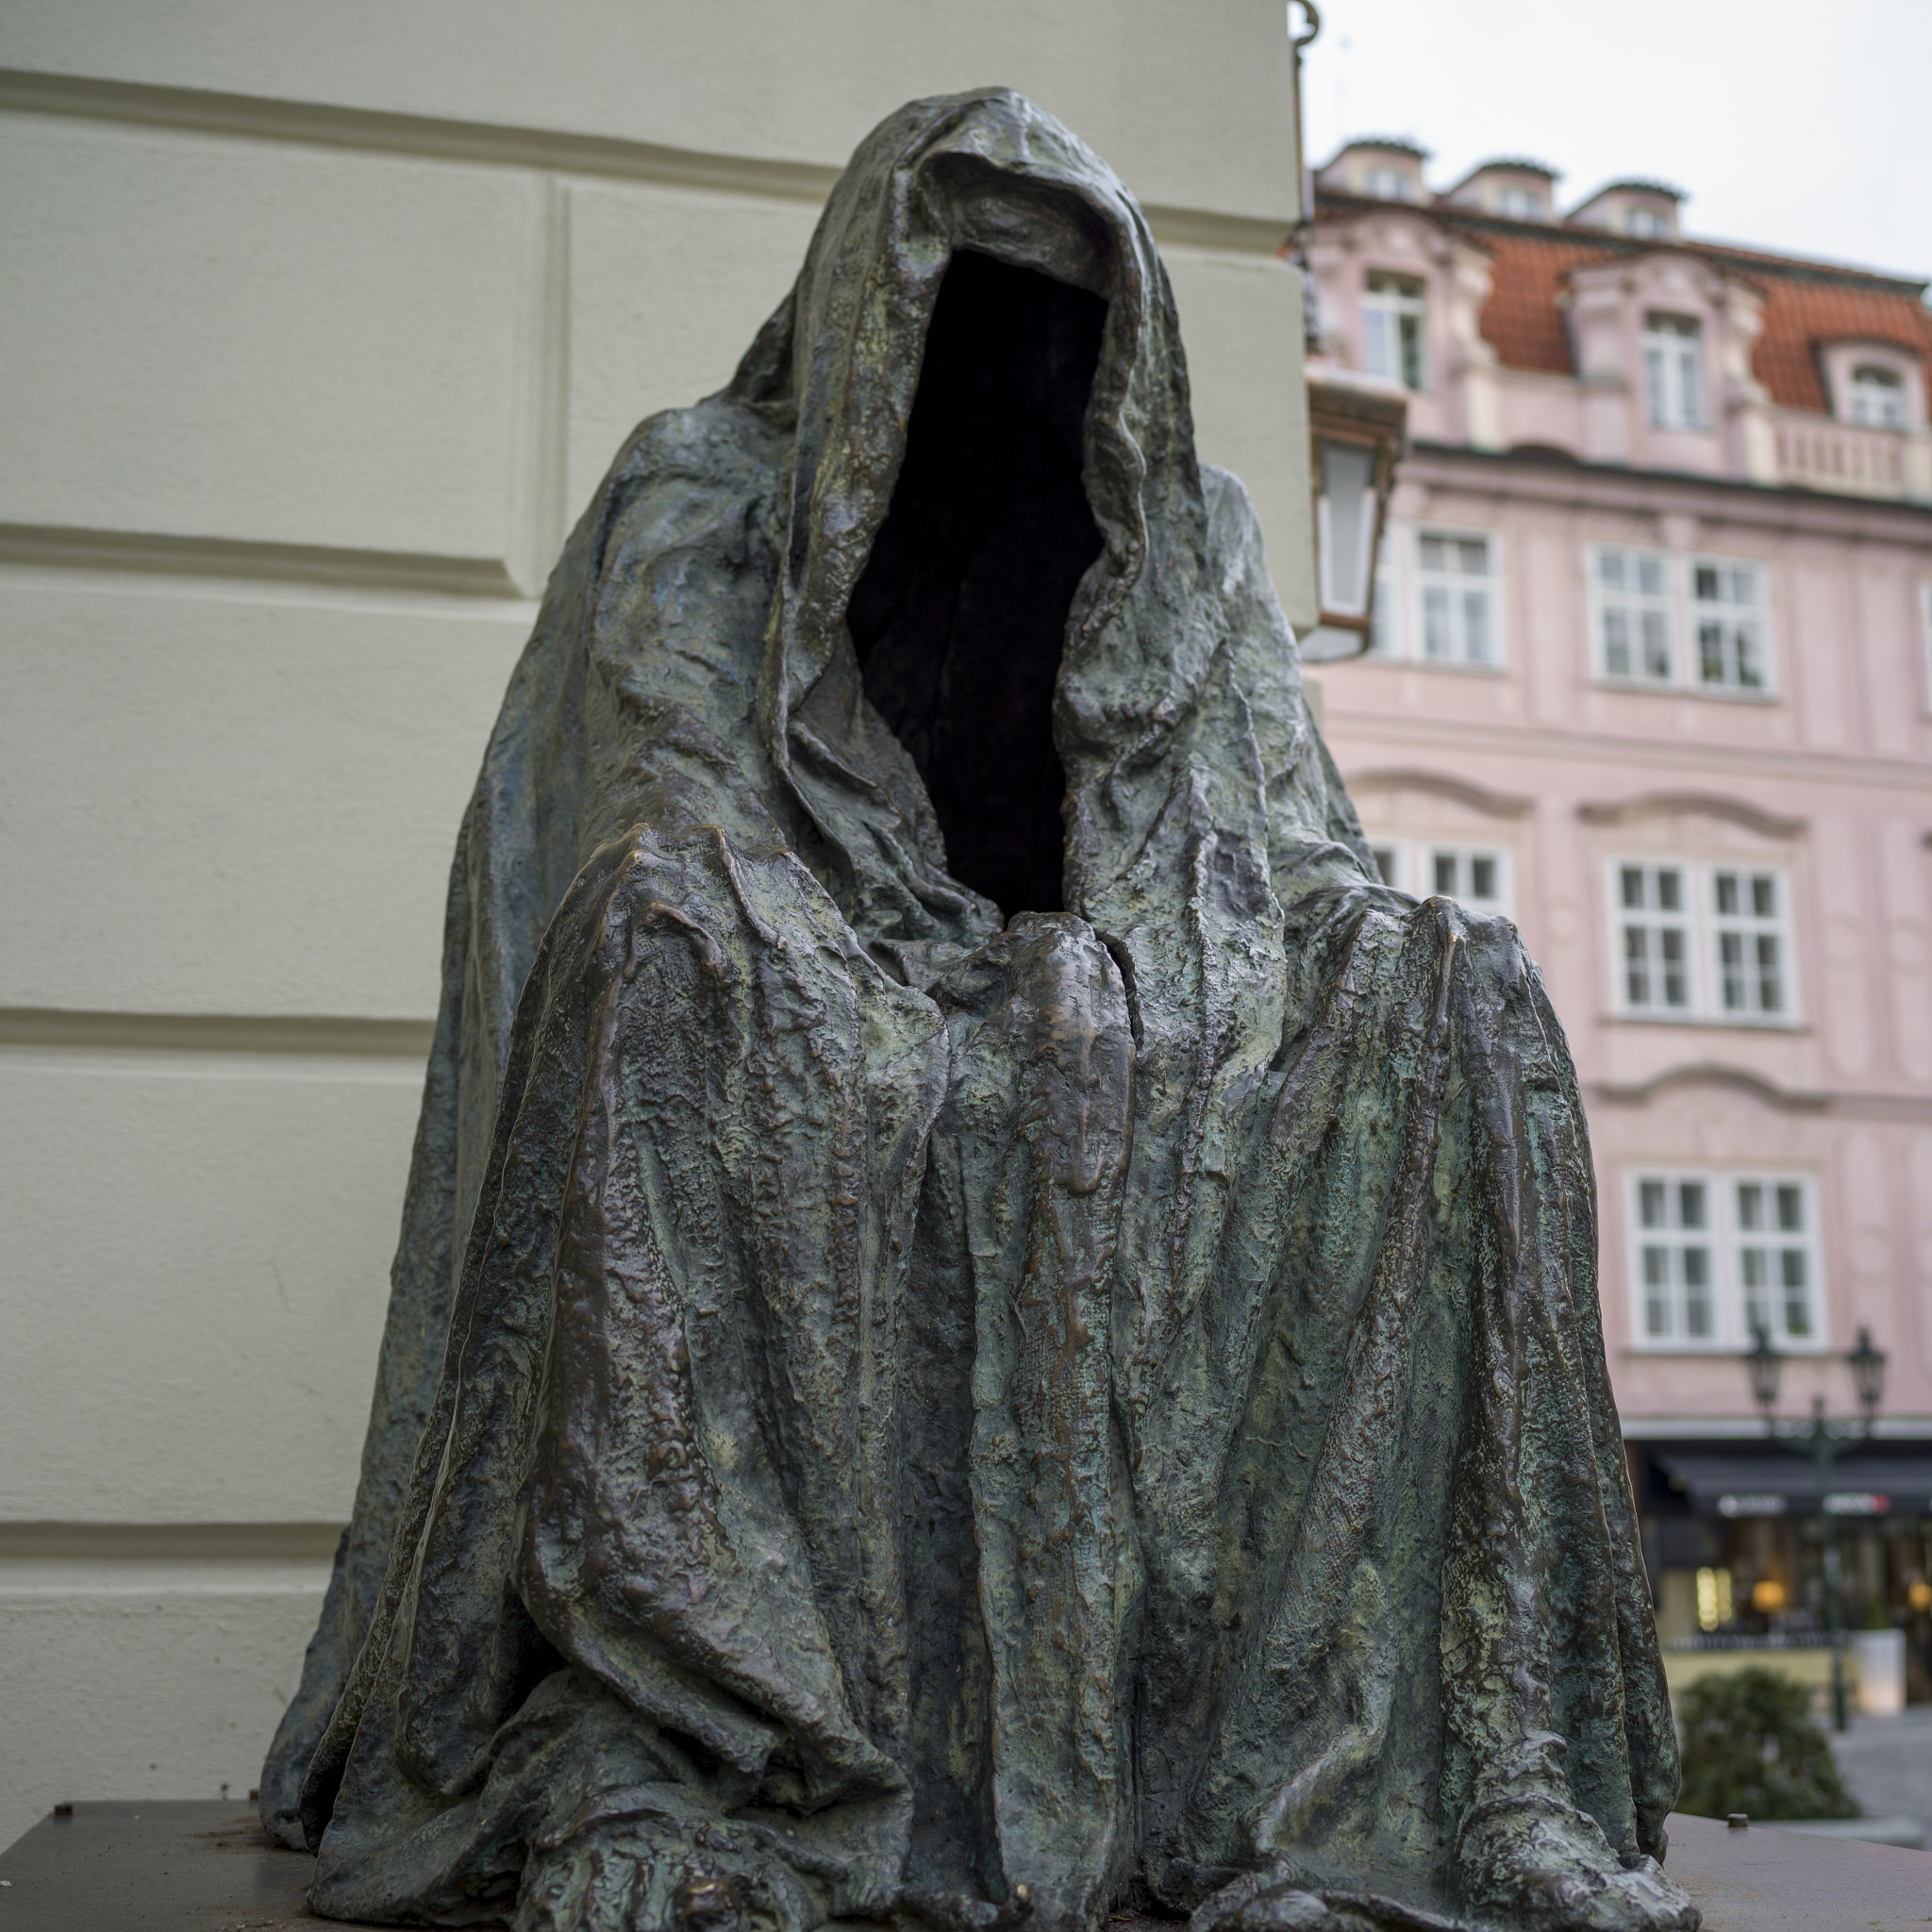 Hasselblad X1D-50c sample photo. Close-up of a statue at old town square, old town, prague, czech photography